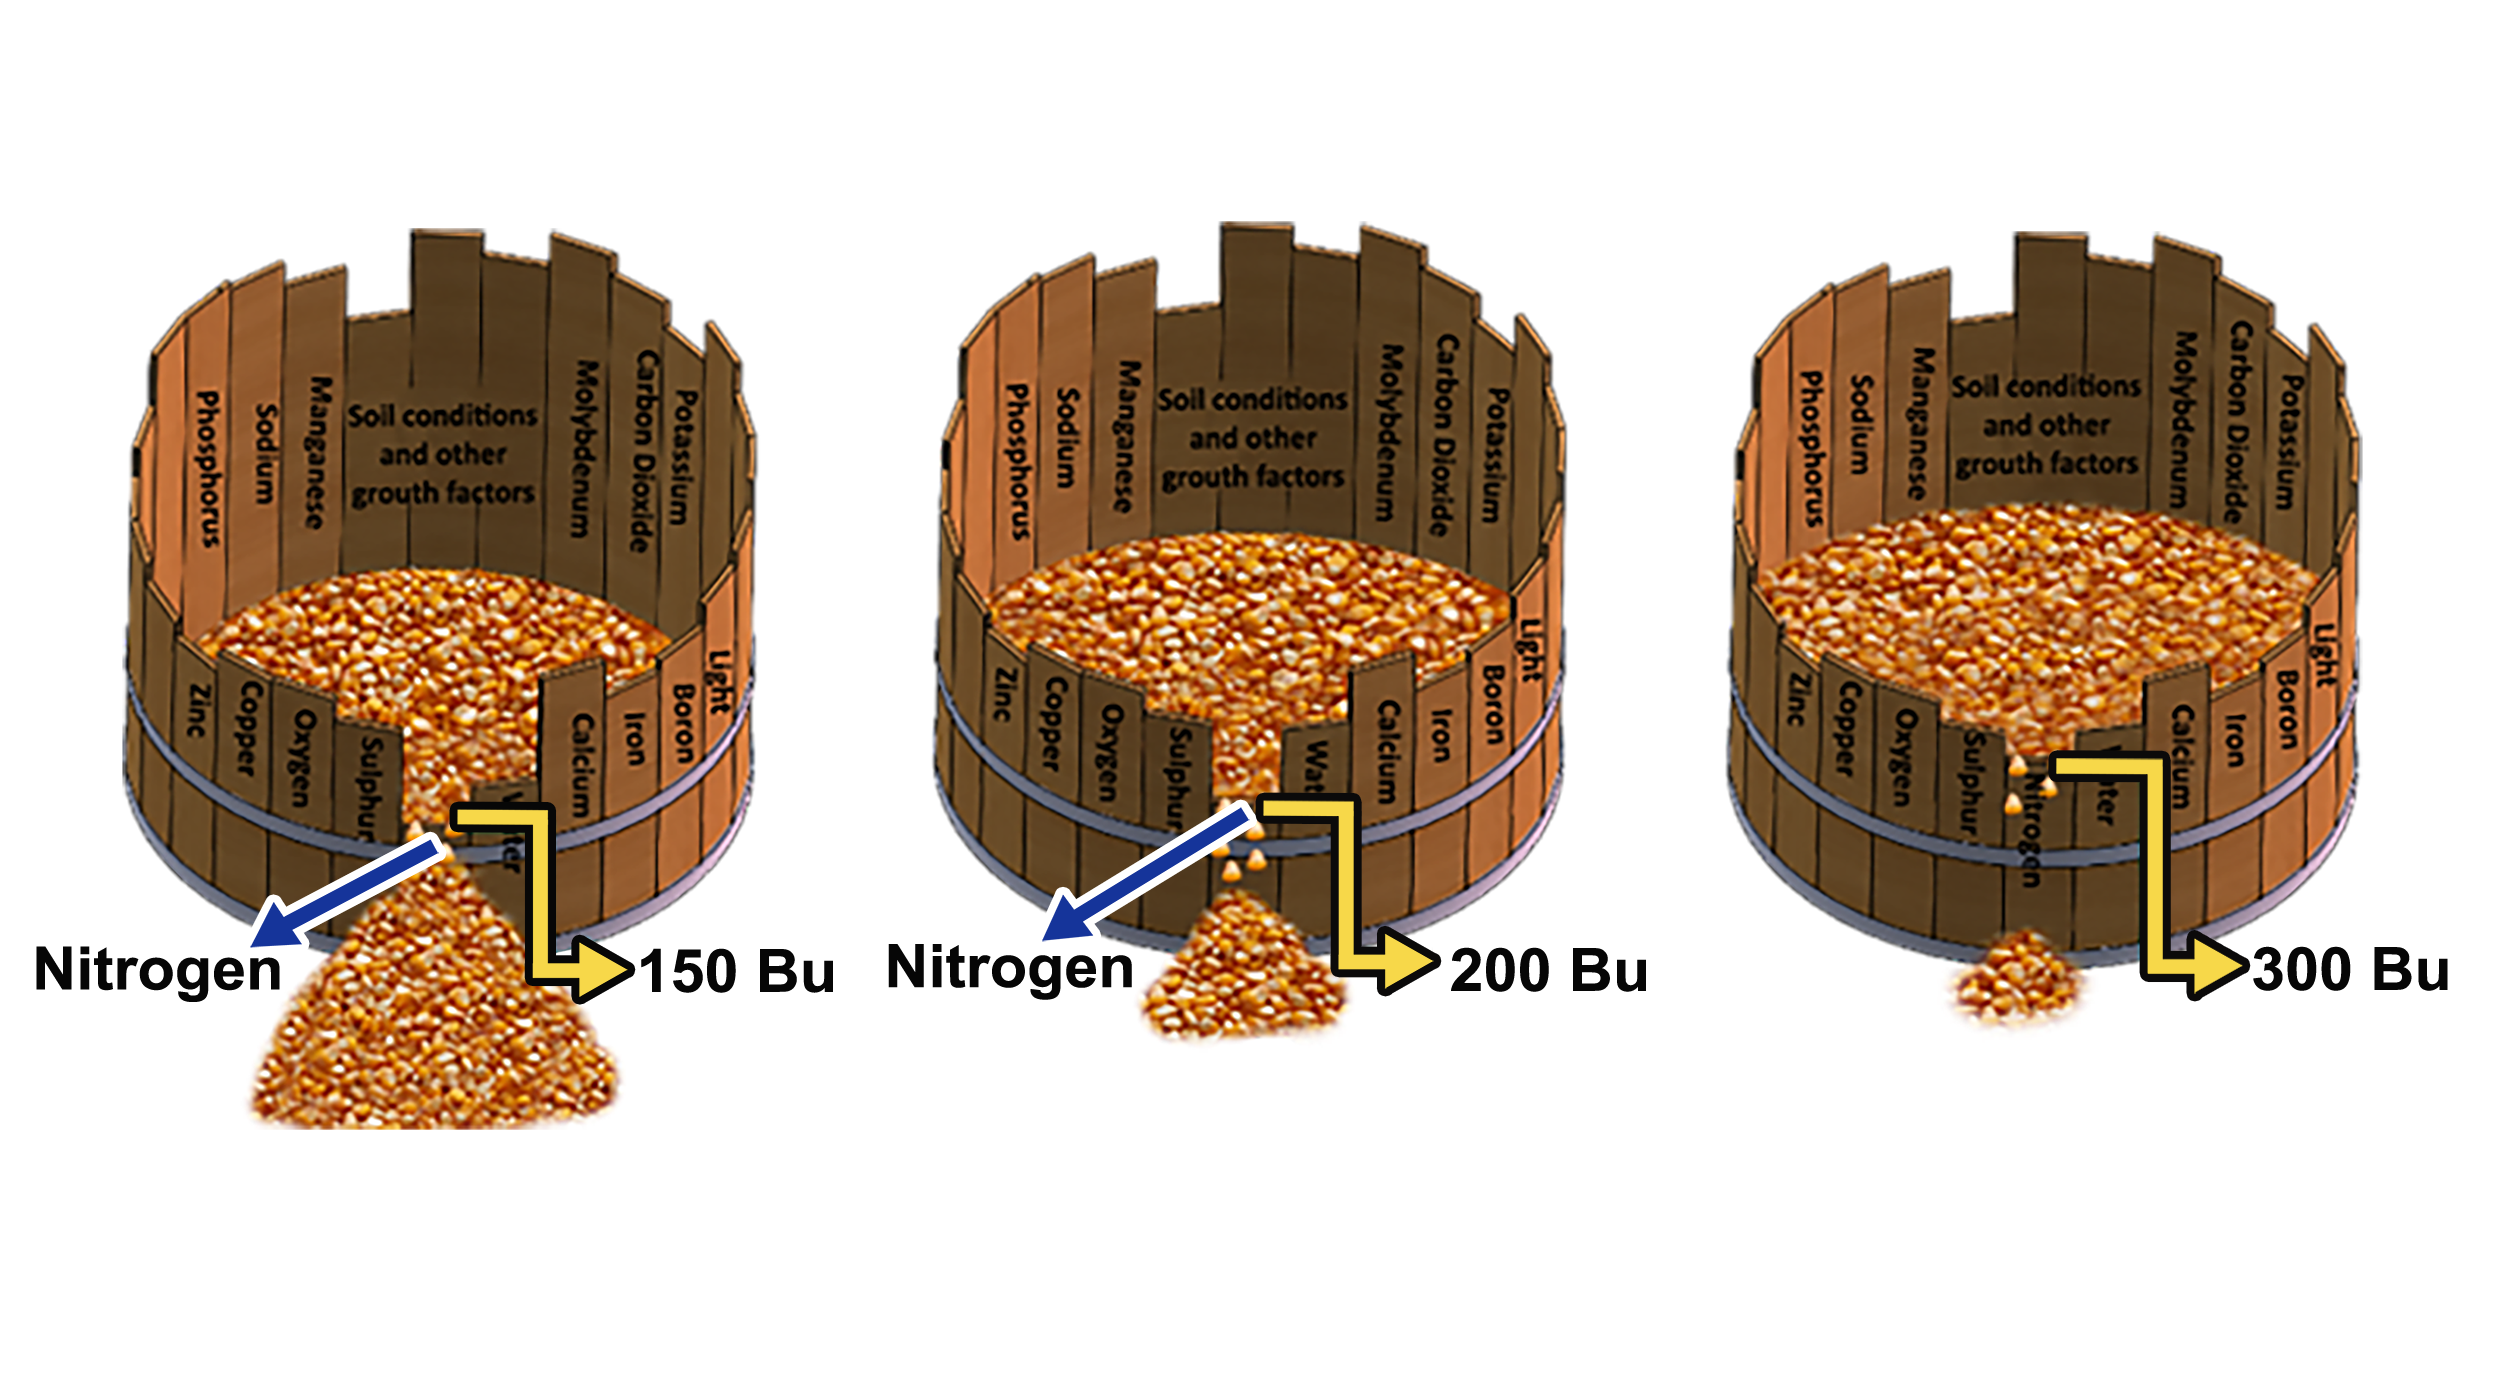 Illustration showing nitrogen levels in relation to grain yield. As nitrogen levels go up, yields increase. For assistance reading this graphic and data set, please call SDSU Extension at 605-688-4792.